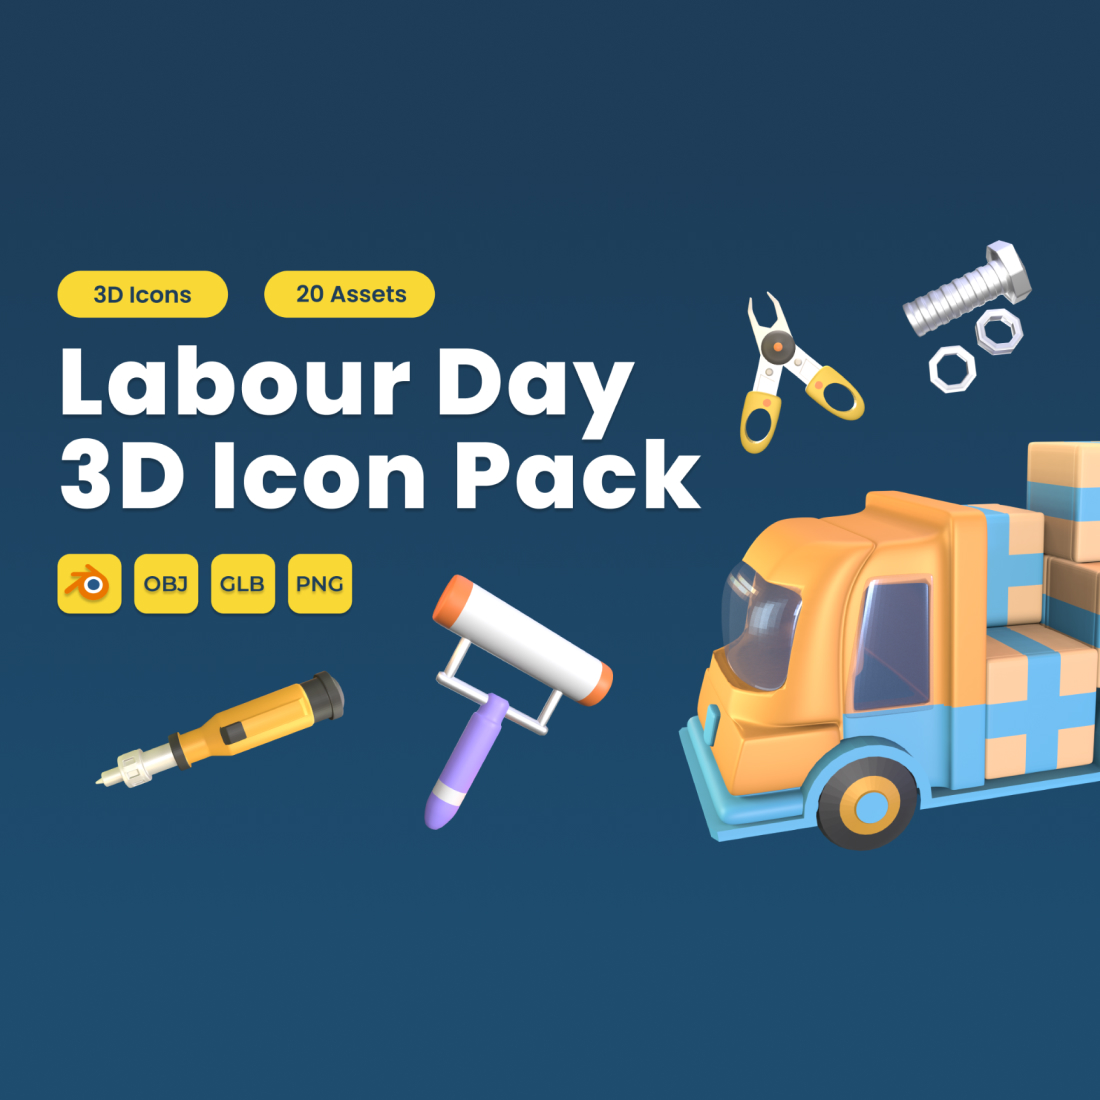 Labour Day 3D Icon Pack Vol 6 cover image.